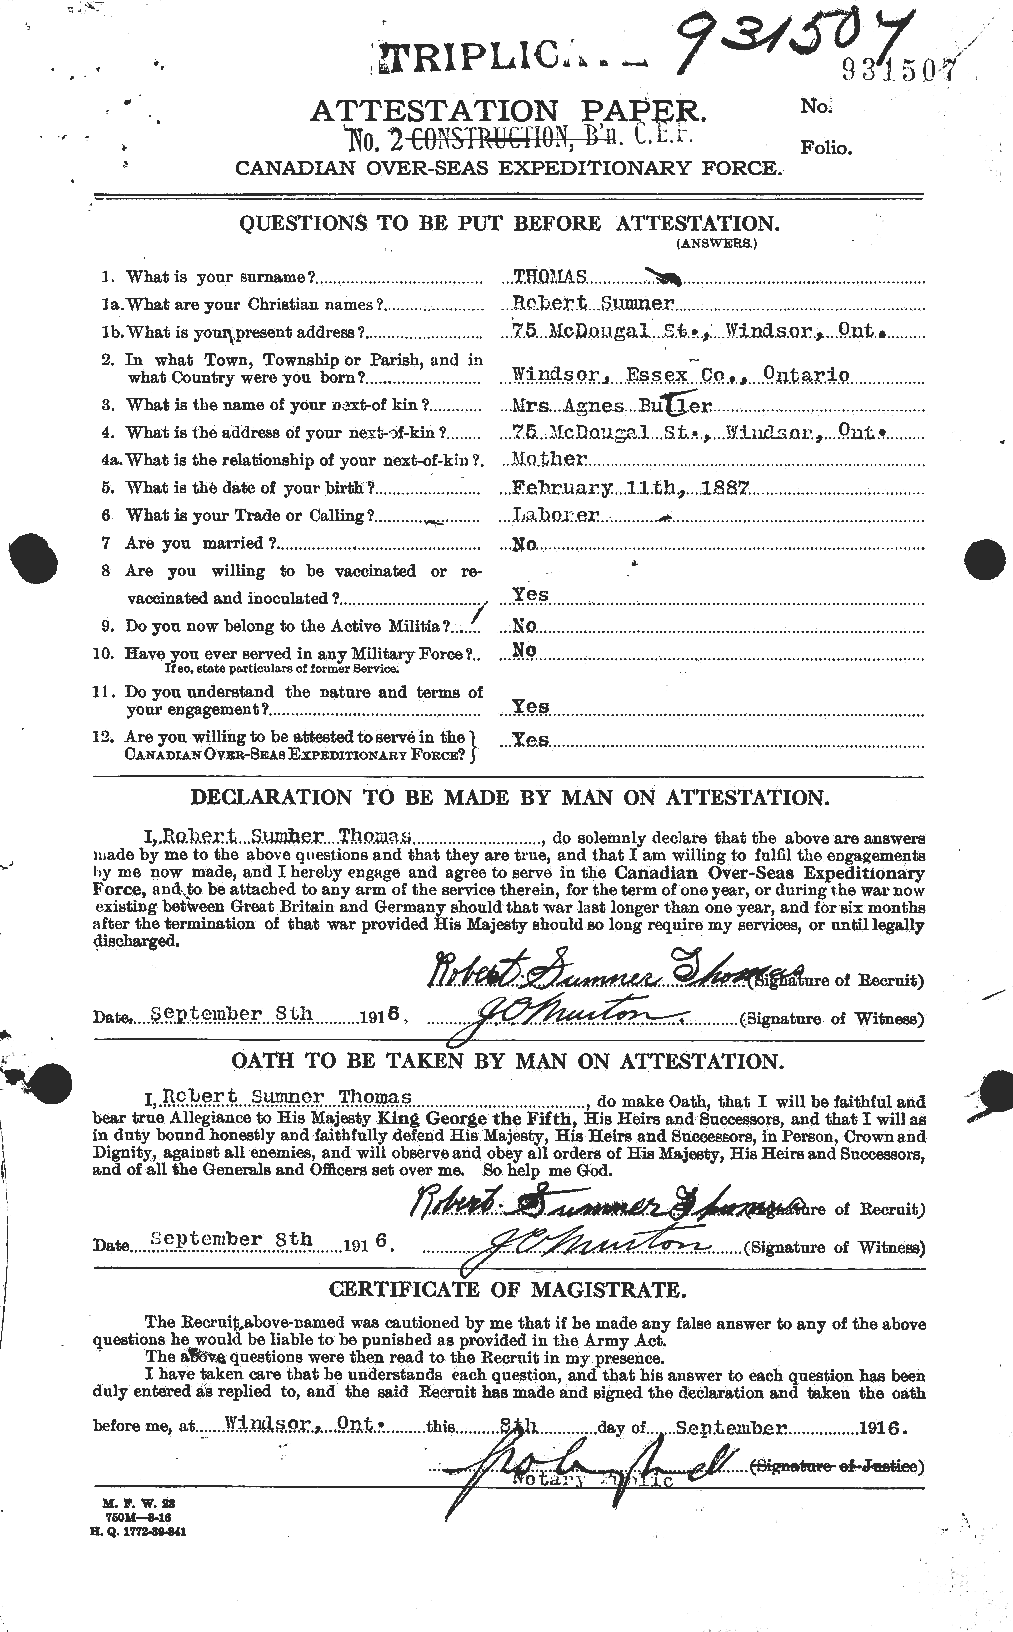 Personnel Records of the First World War - CEF 632652a